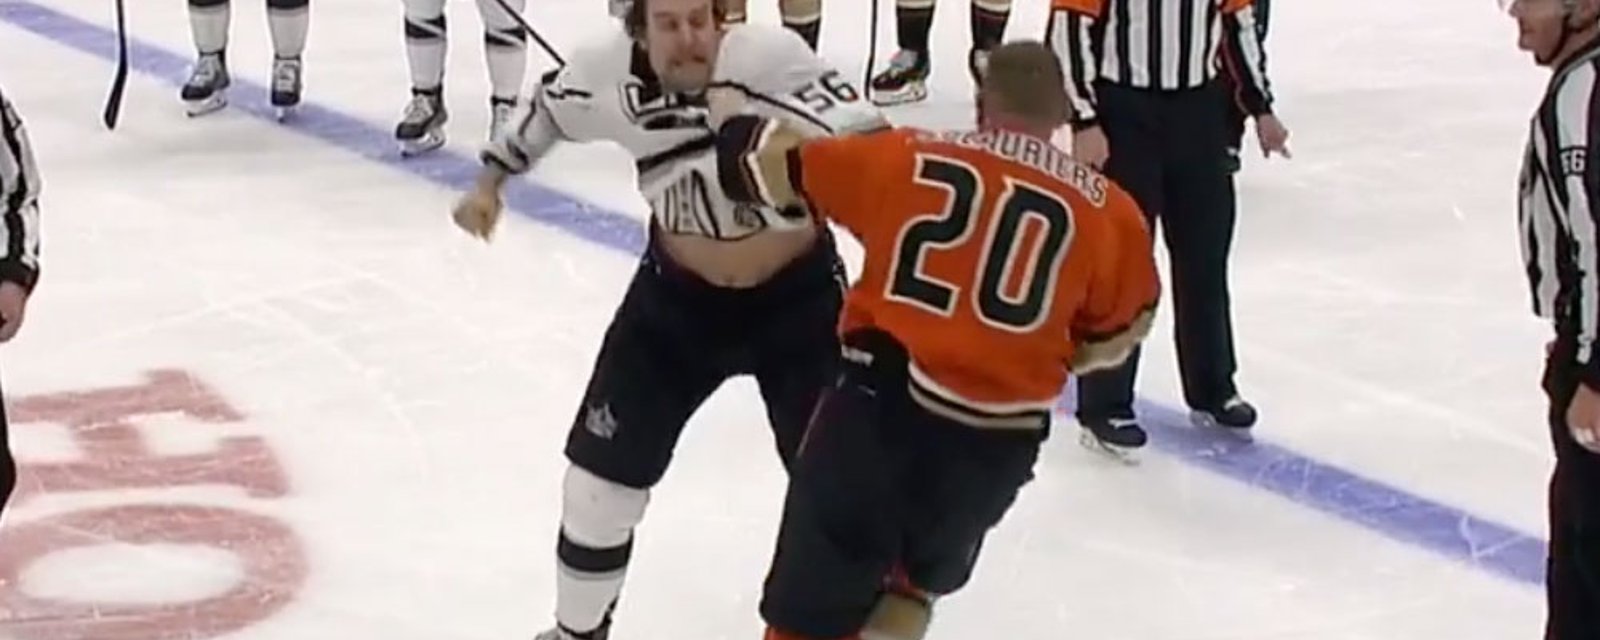 Rarely seen heavyweight fight between Deslauriers and MacDermid ends in unexpected way! 